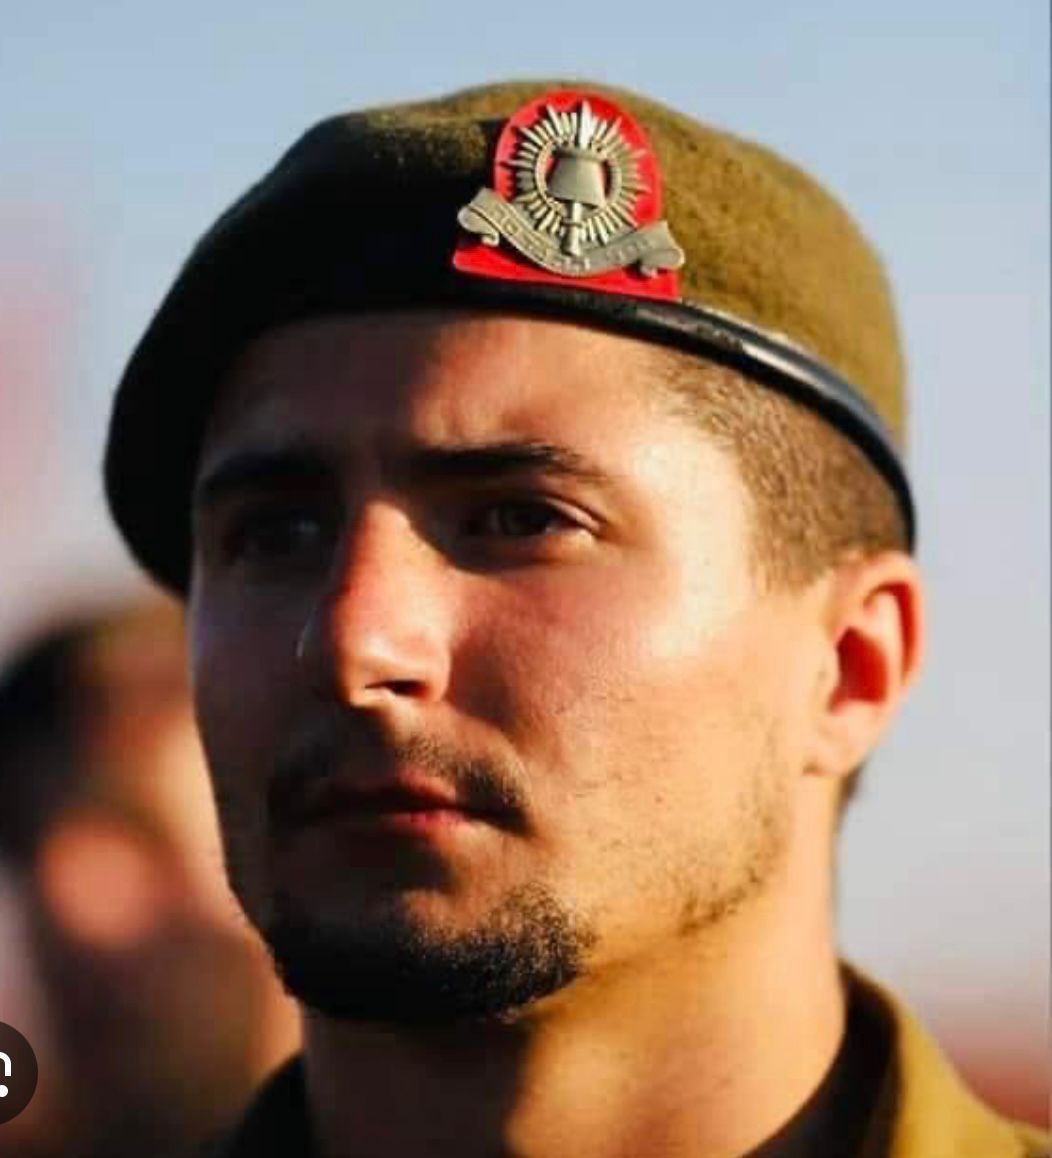 Sergeant Yonatan Din Hayim was born. He made Aliyah, and enlisted. He fell in battle in the Gaza Strip. 'When he went up to Israel, I knew he would stay there forever,' his brother eulogized him at the funeral ceremony in the US.